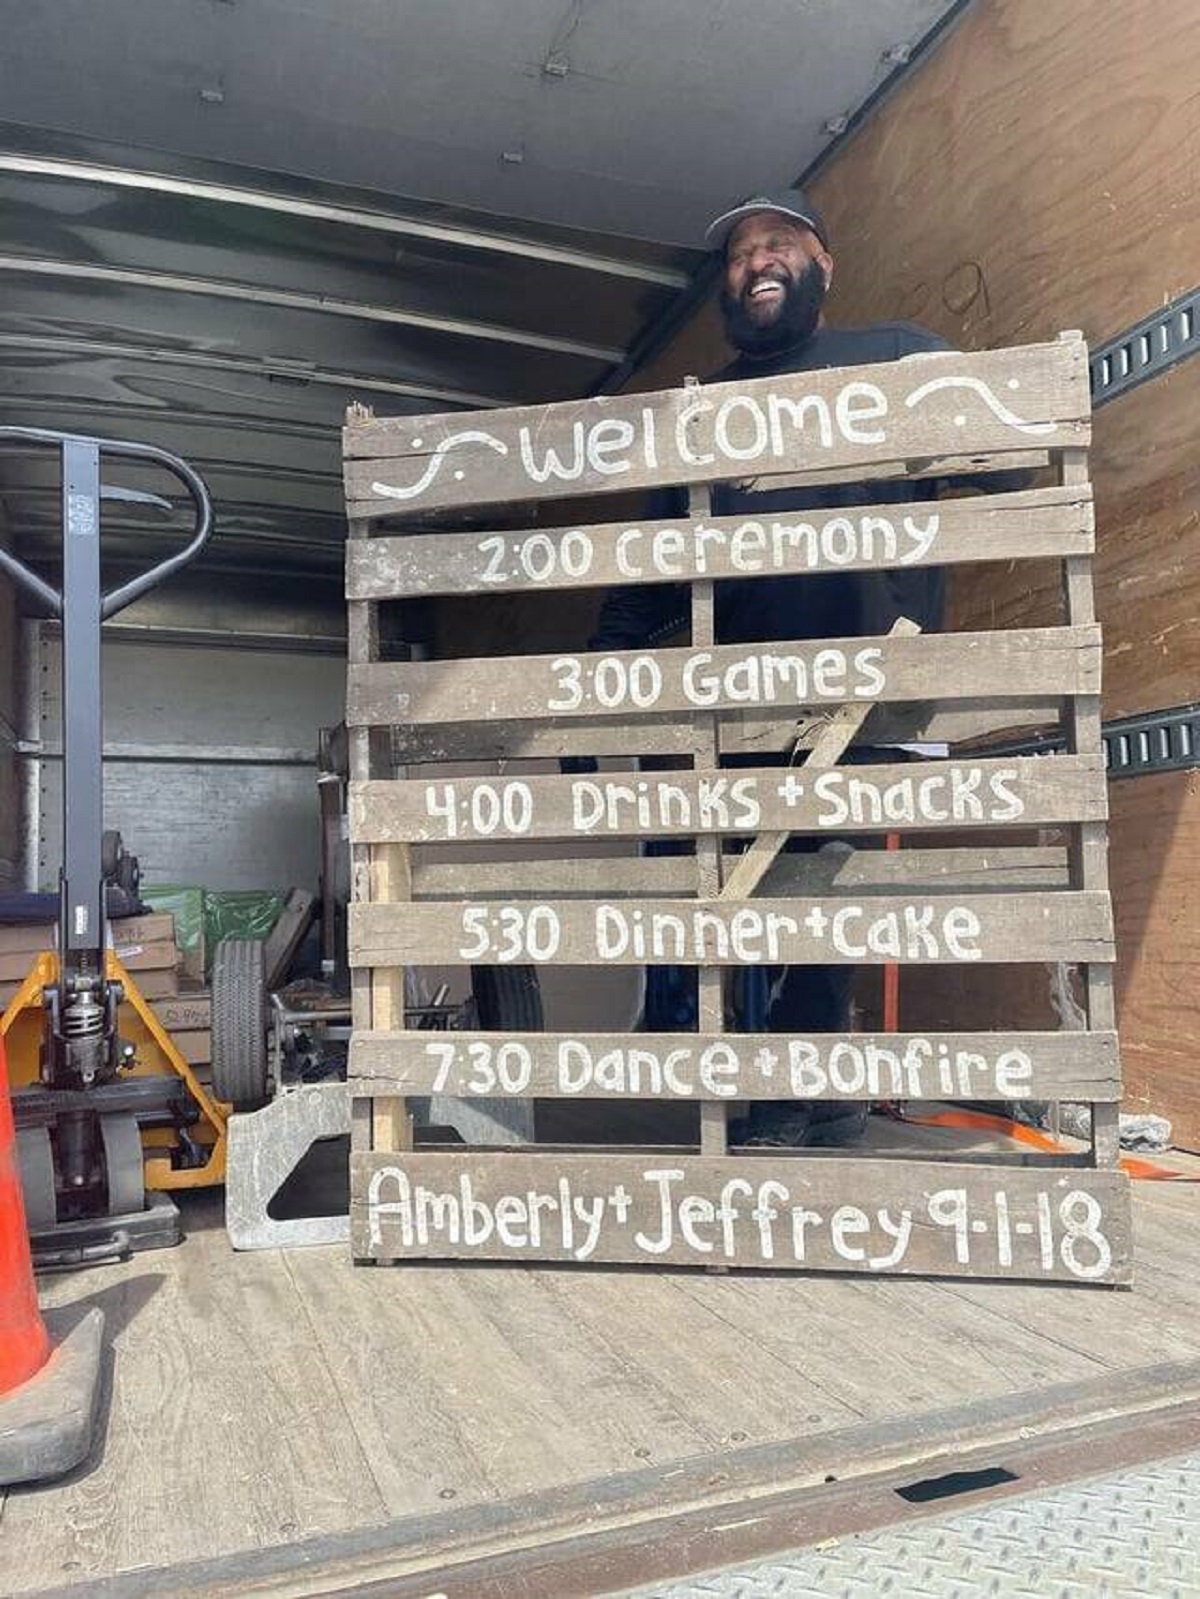 "My shipping pallet had previously been used as a sign at a wedding in 2018"